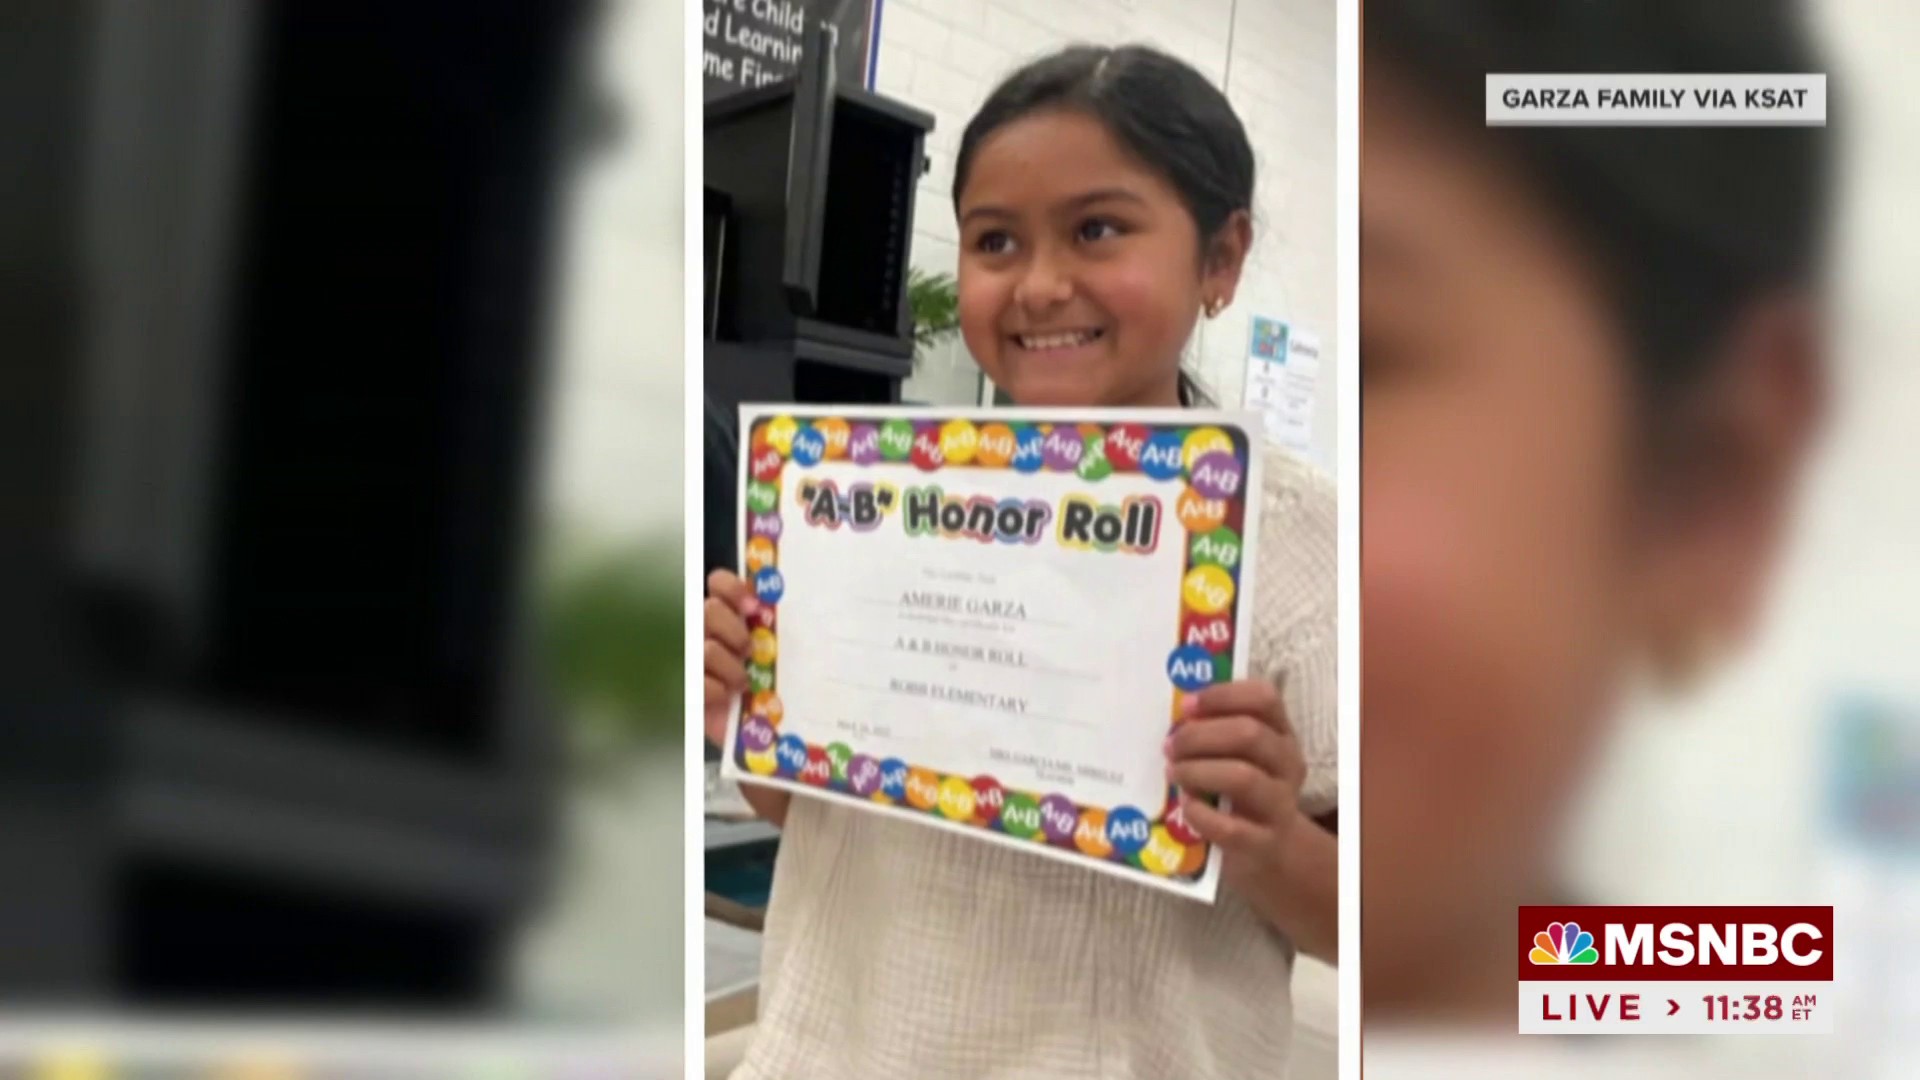 MSNBC - A 10-year-old boy who was just in an awards ceremony with his mother. A 9-year-old girl who just proudly made honor roll. Teachers who tried to shield their students from attack.  Here's what we know about the victims of the Texas elementary school massacre. 